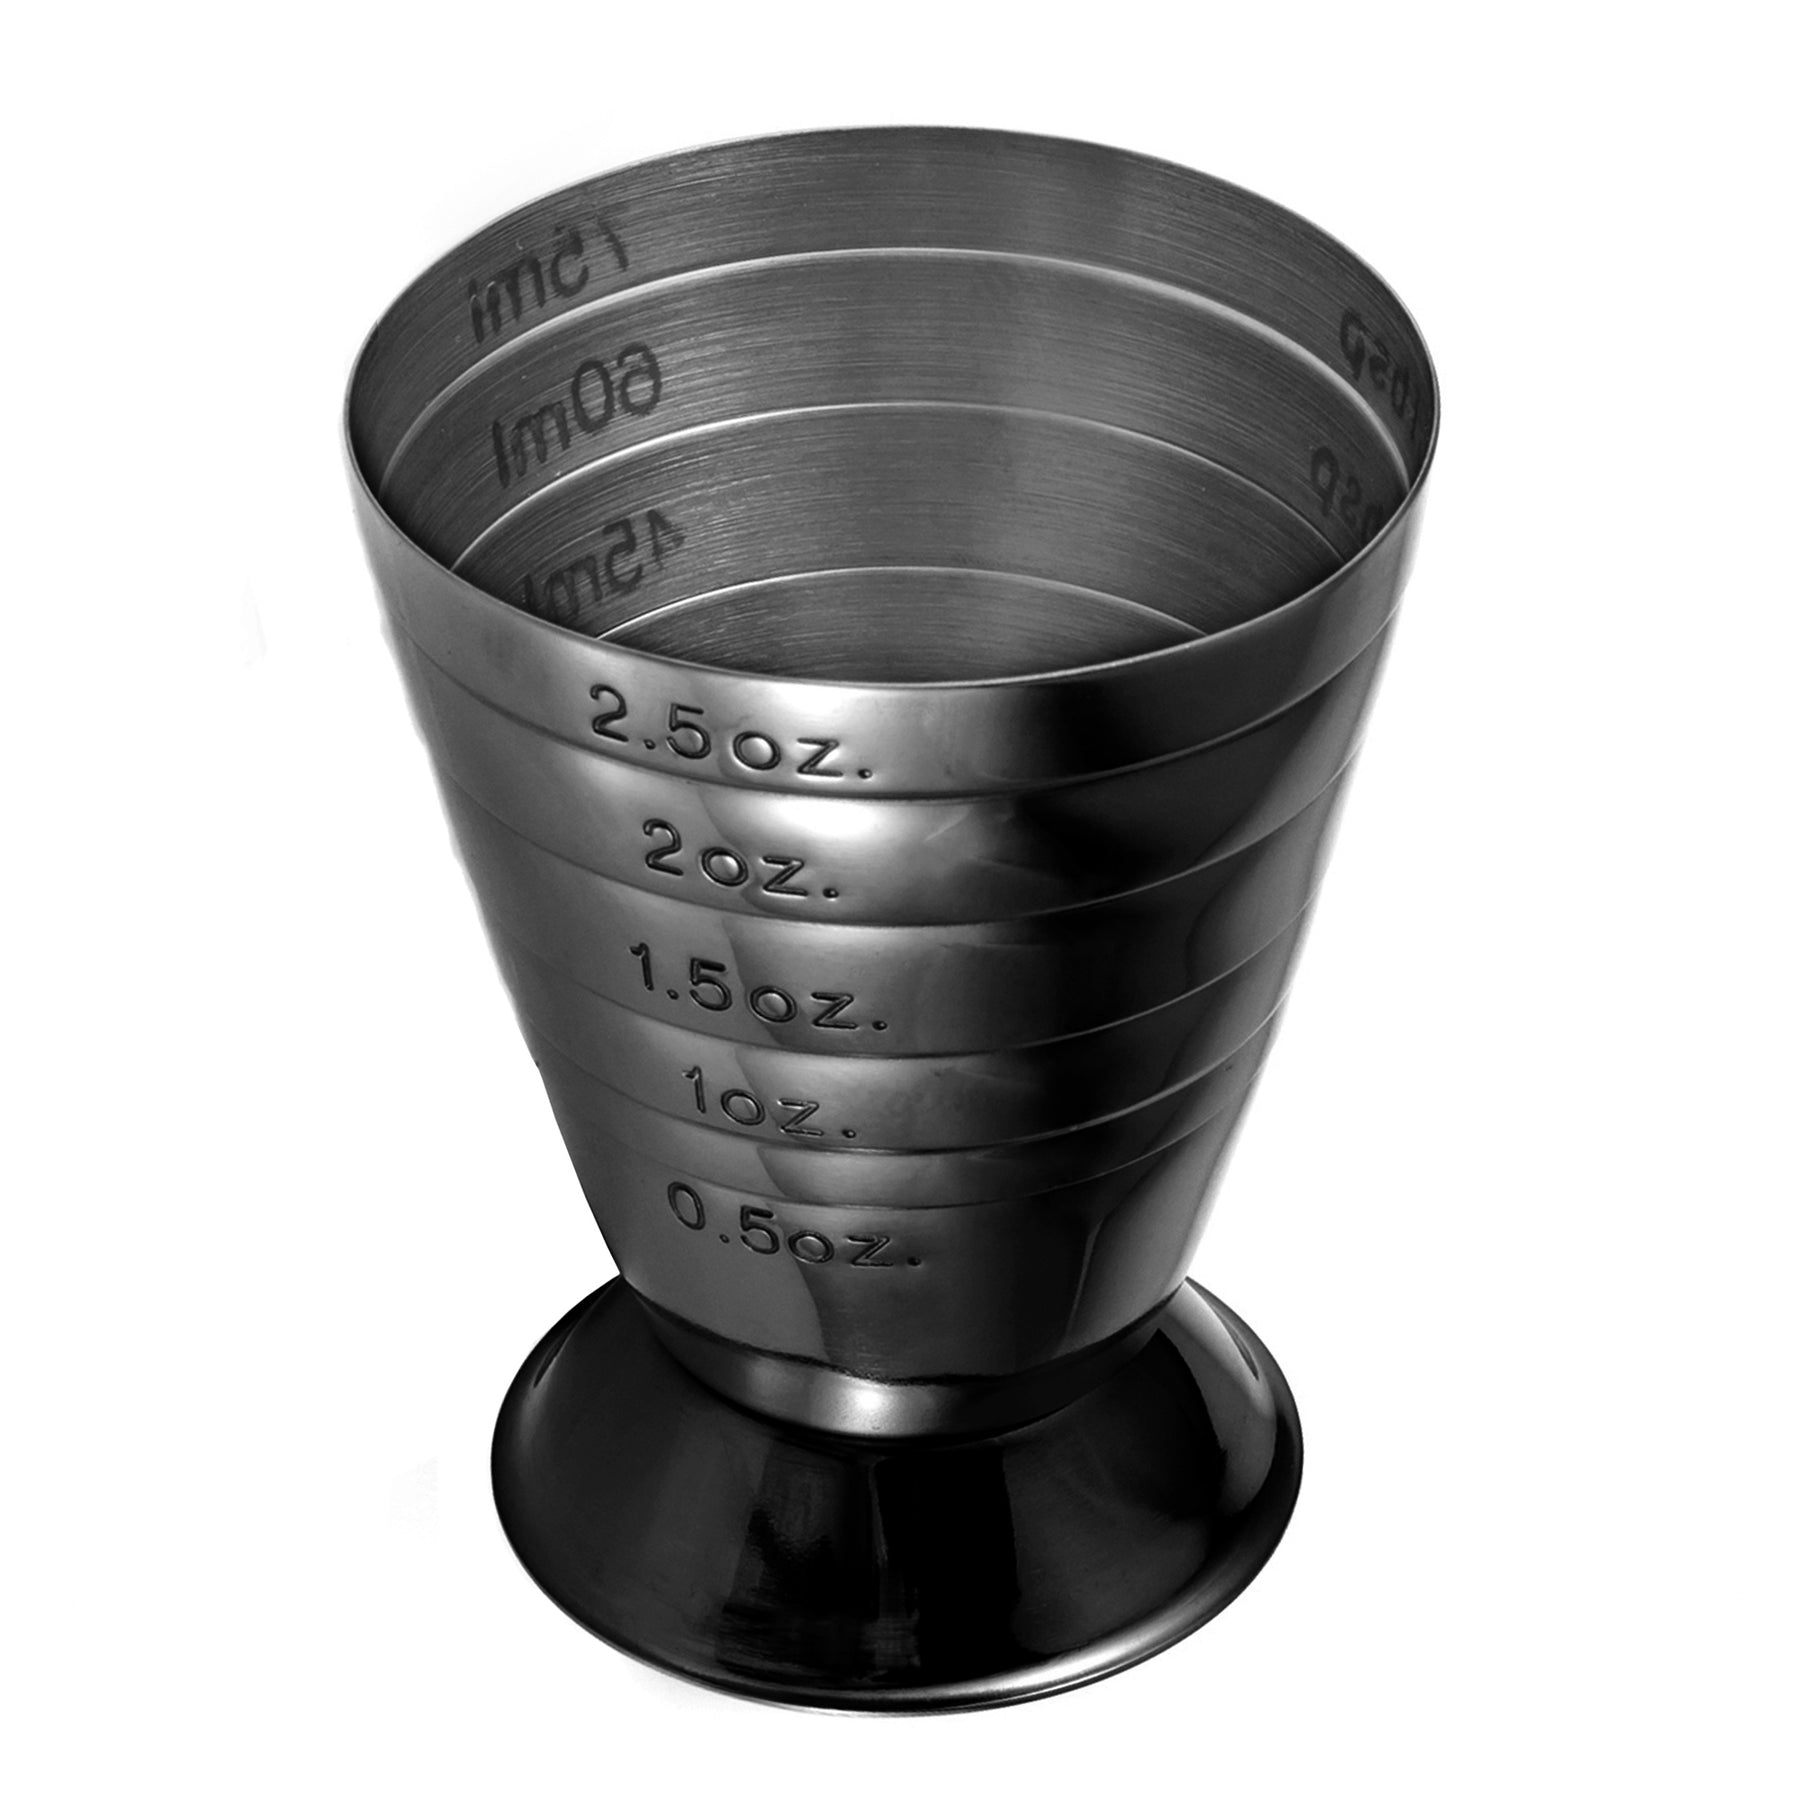 Stainless Steel Measuring Cup, 2.5 Oz, 75 Ml, 5 Tbsp, Cocktail